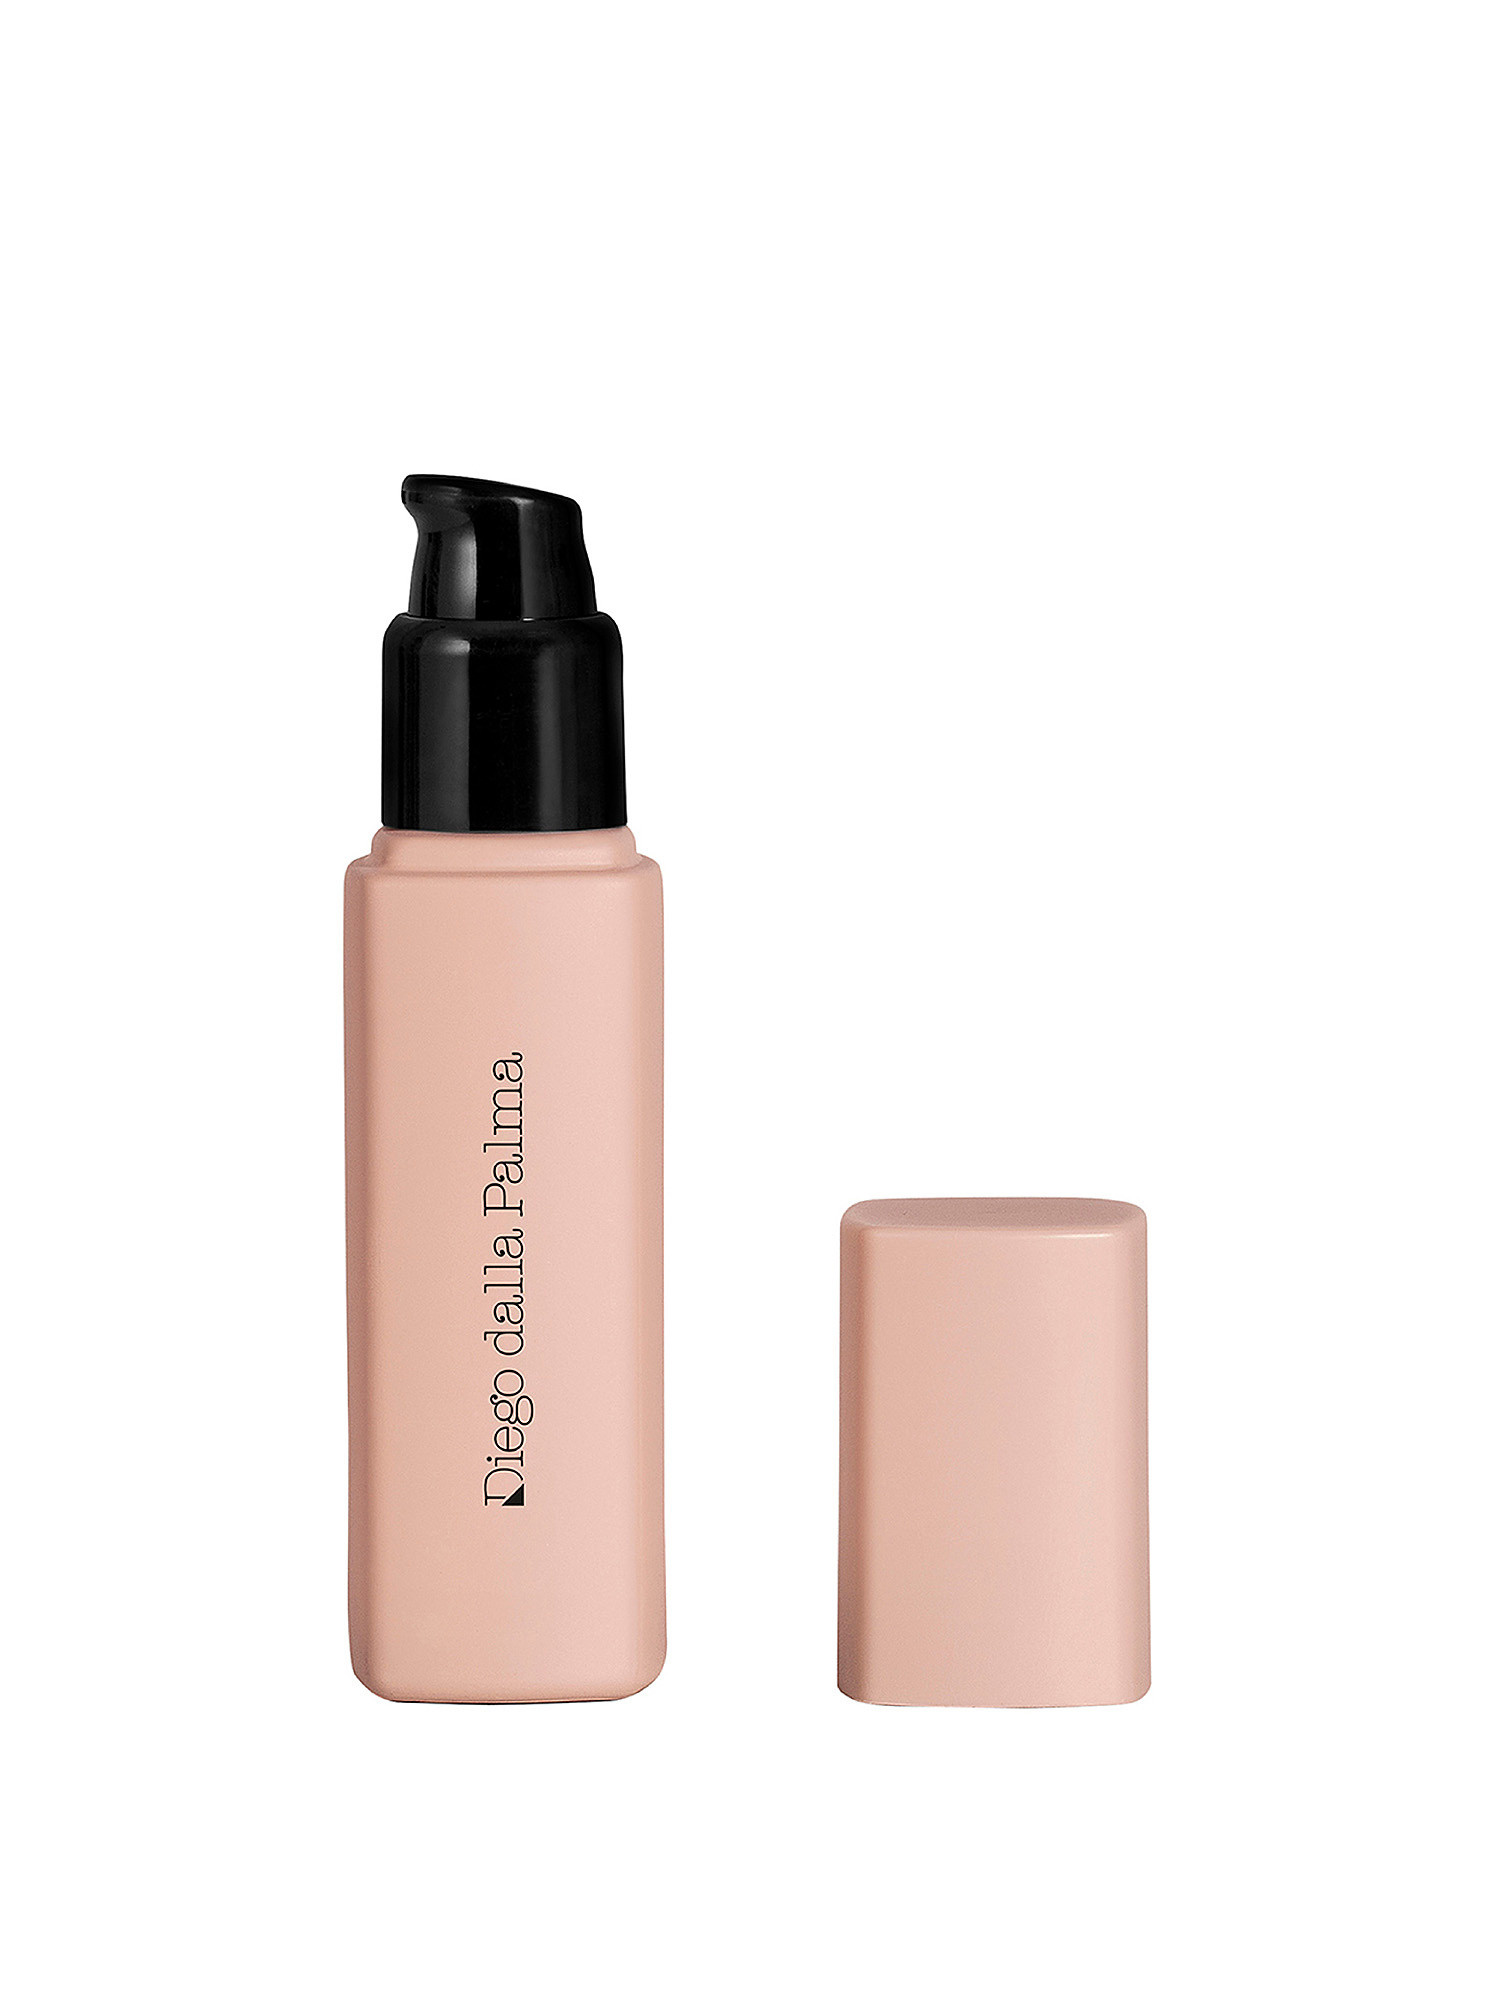 NUDISSIMO Naturally Matt Foundation - 249W, Bronze Brown, large image number 0